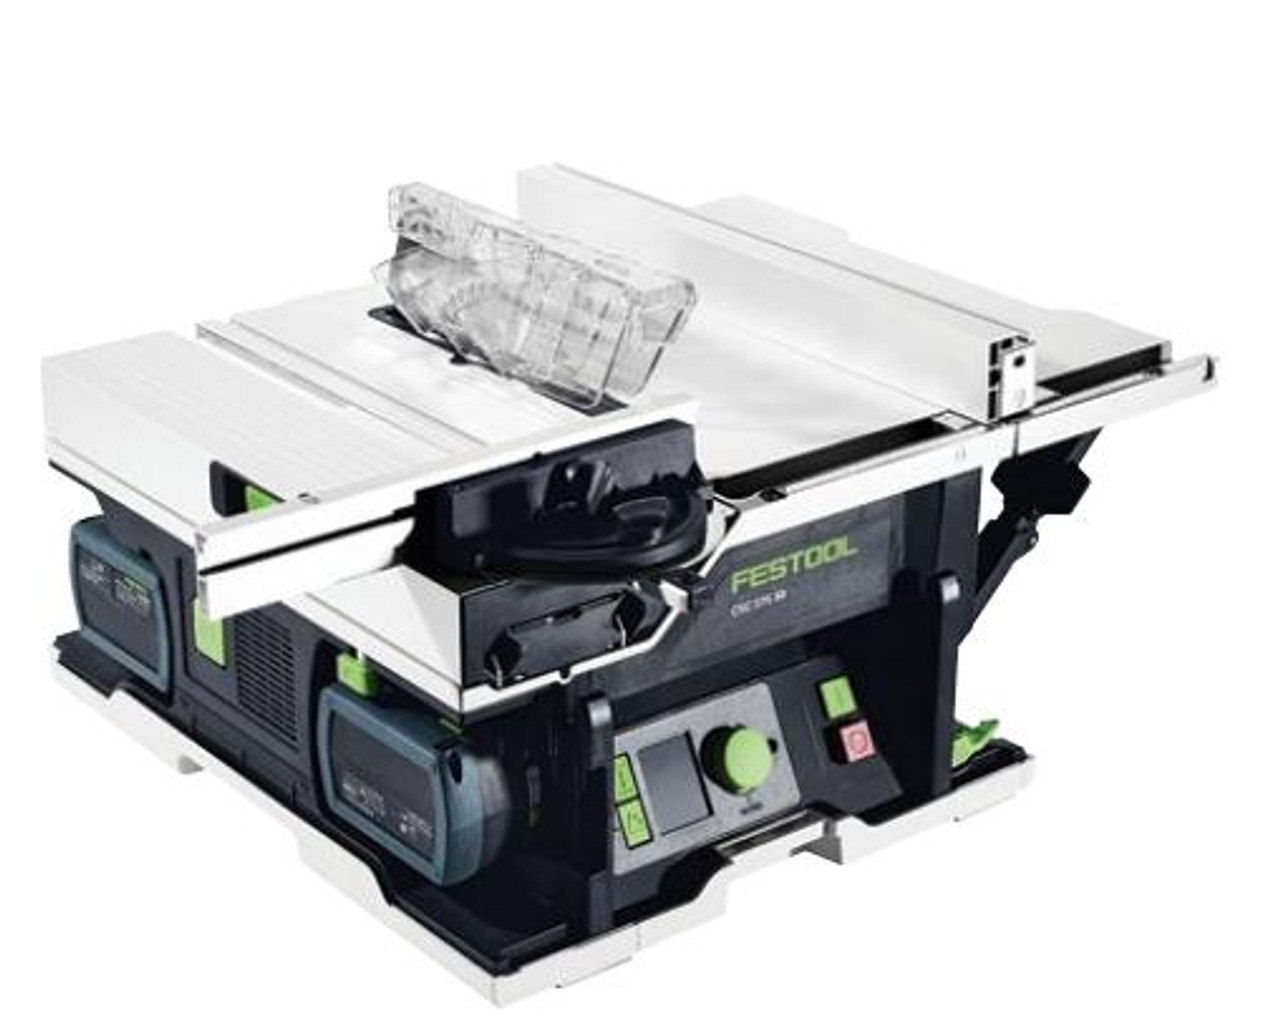 Festool FESTOOL CSC SYS 50 cordless table saw Several Options to Choose From 